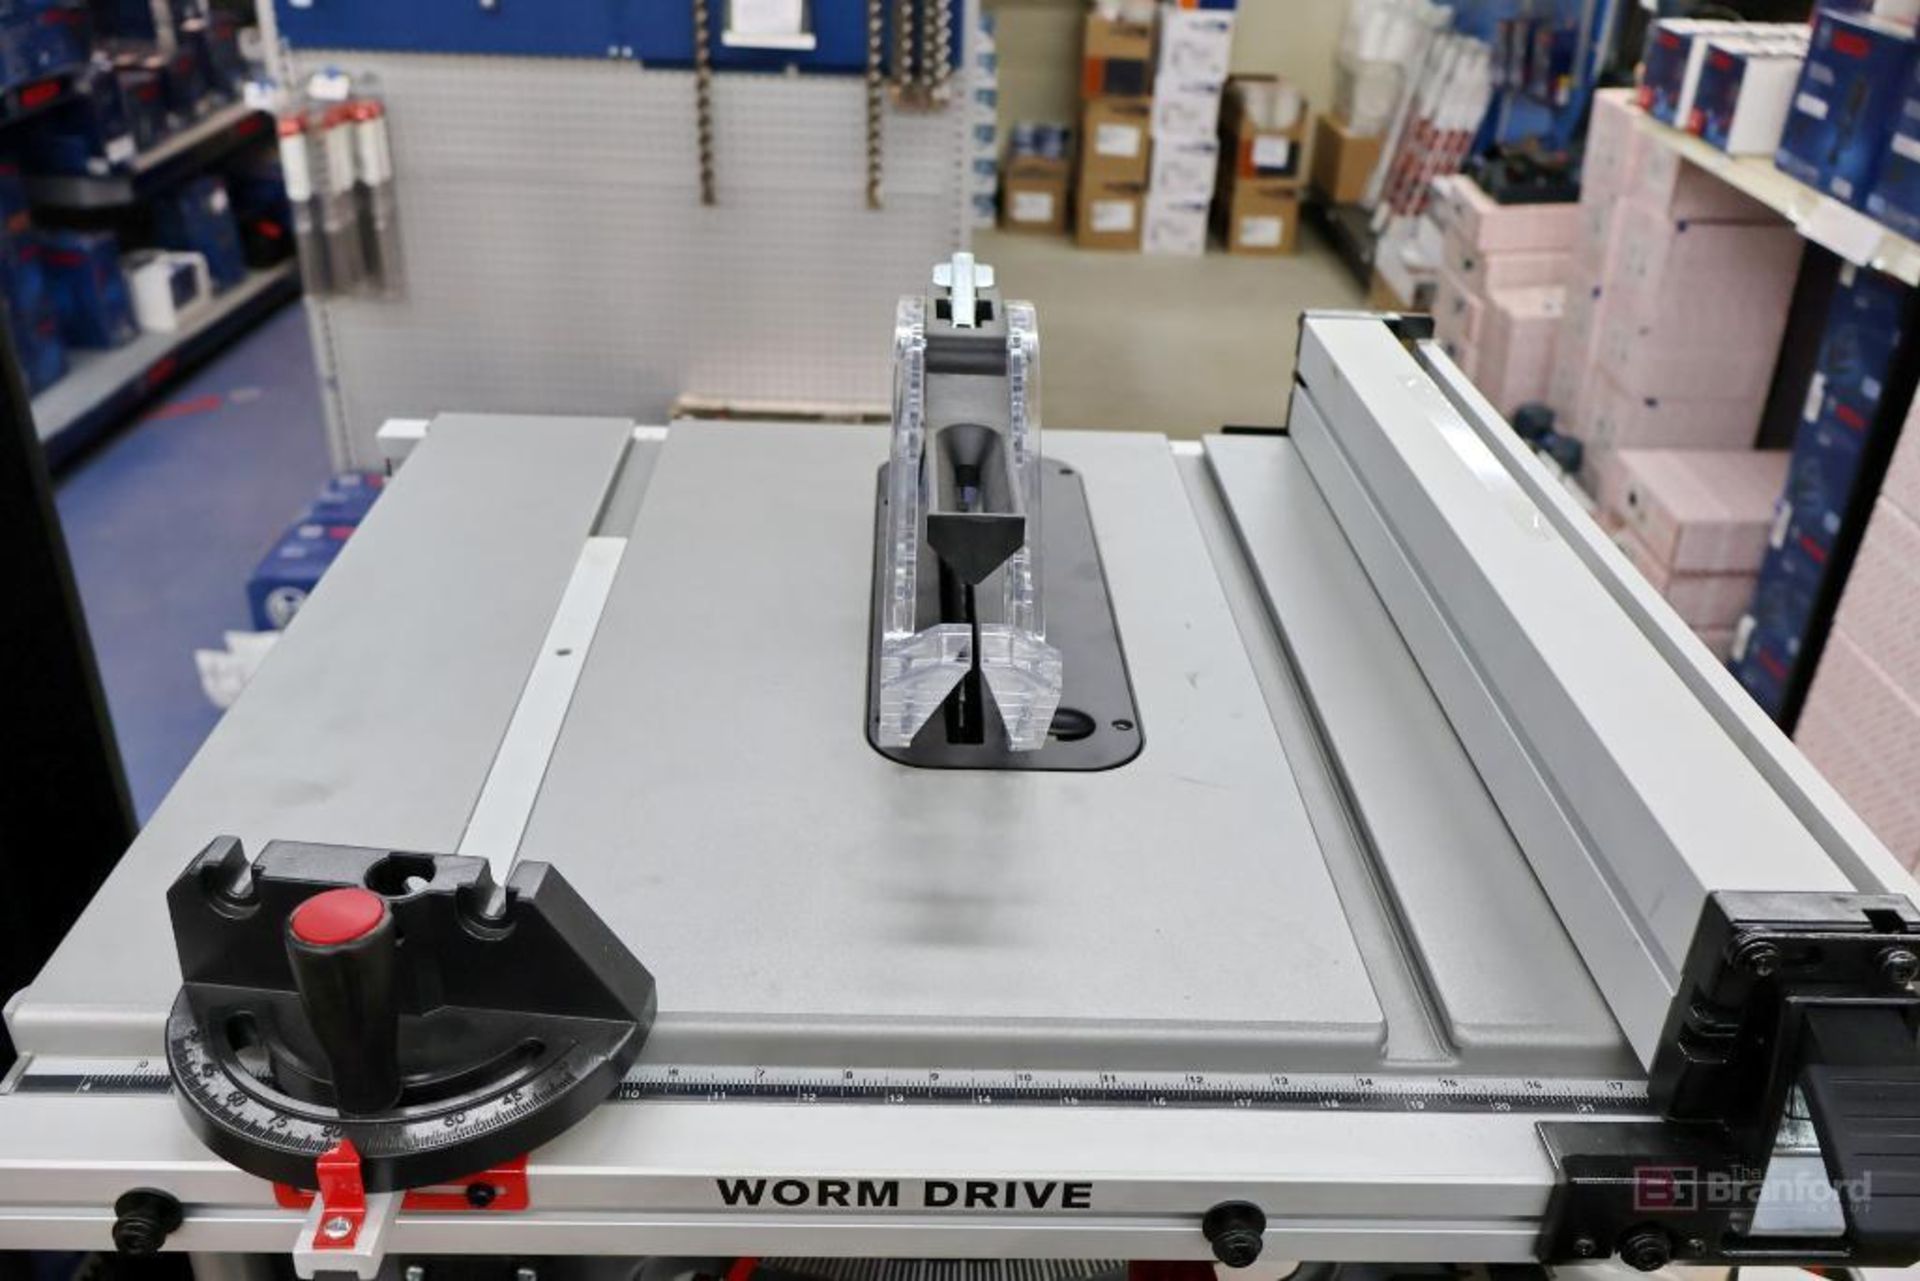 SKILSAW SPT 99 T-01 Portable Worm Drive Table Saw - Image 5 of 8